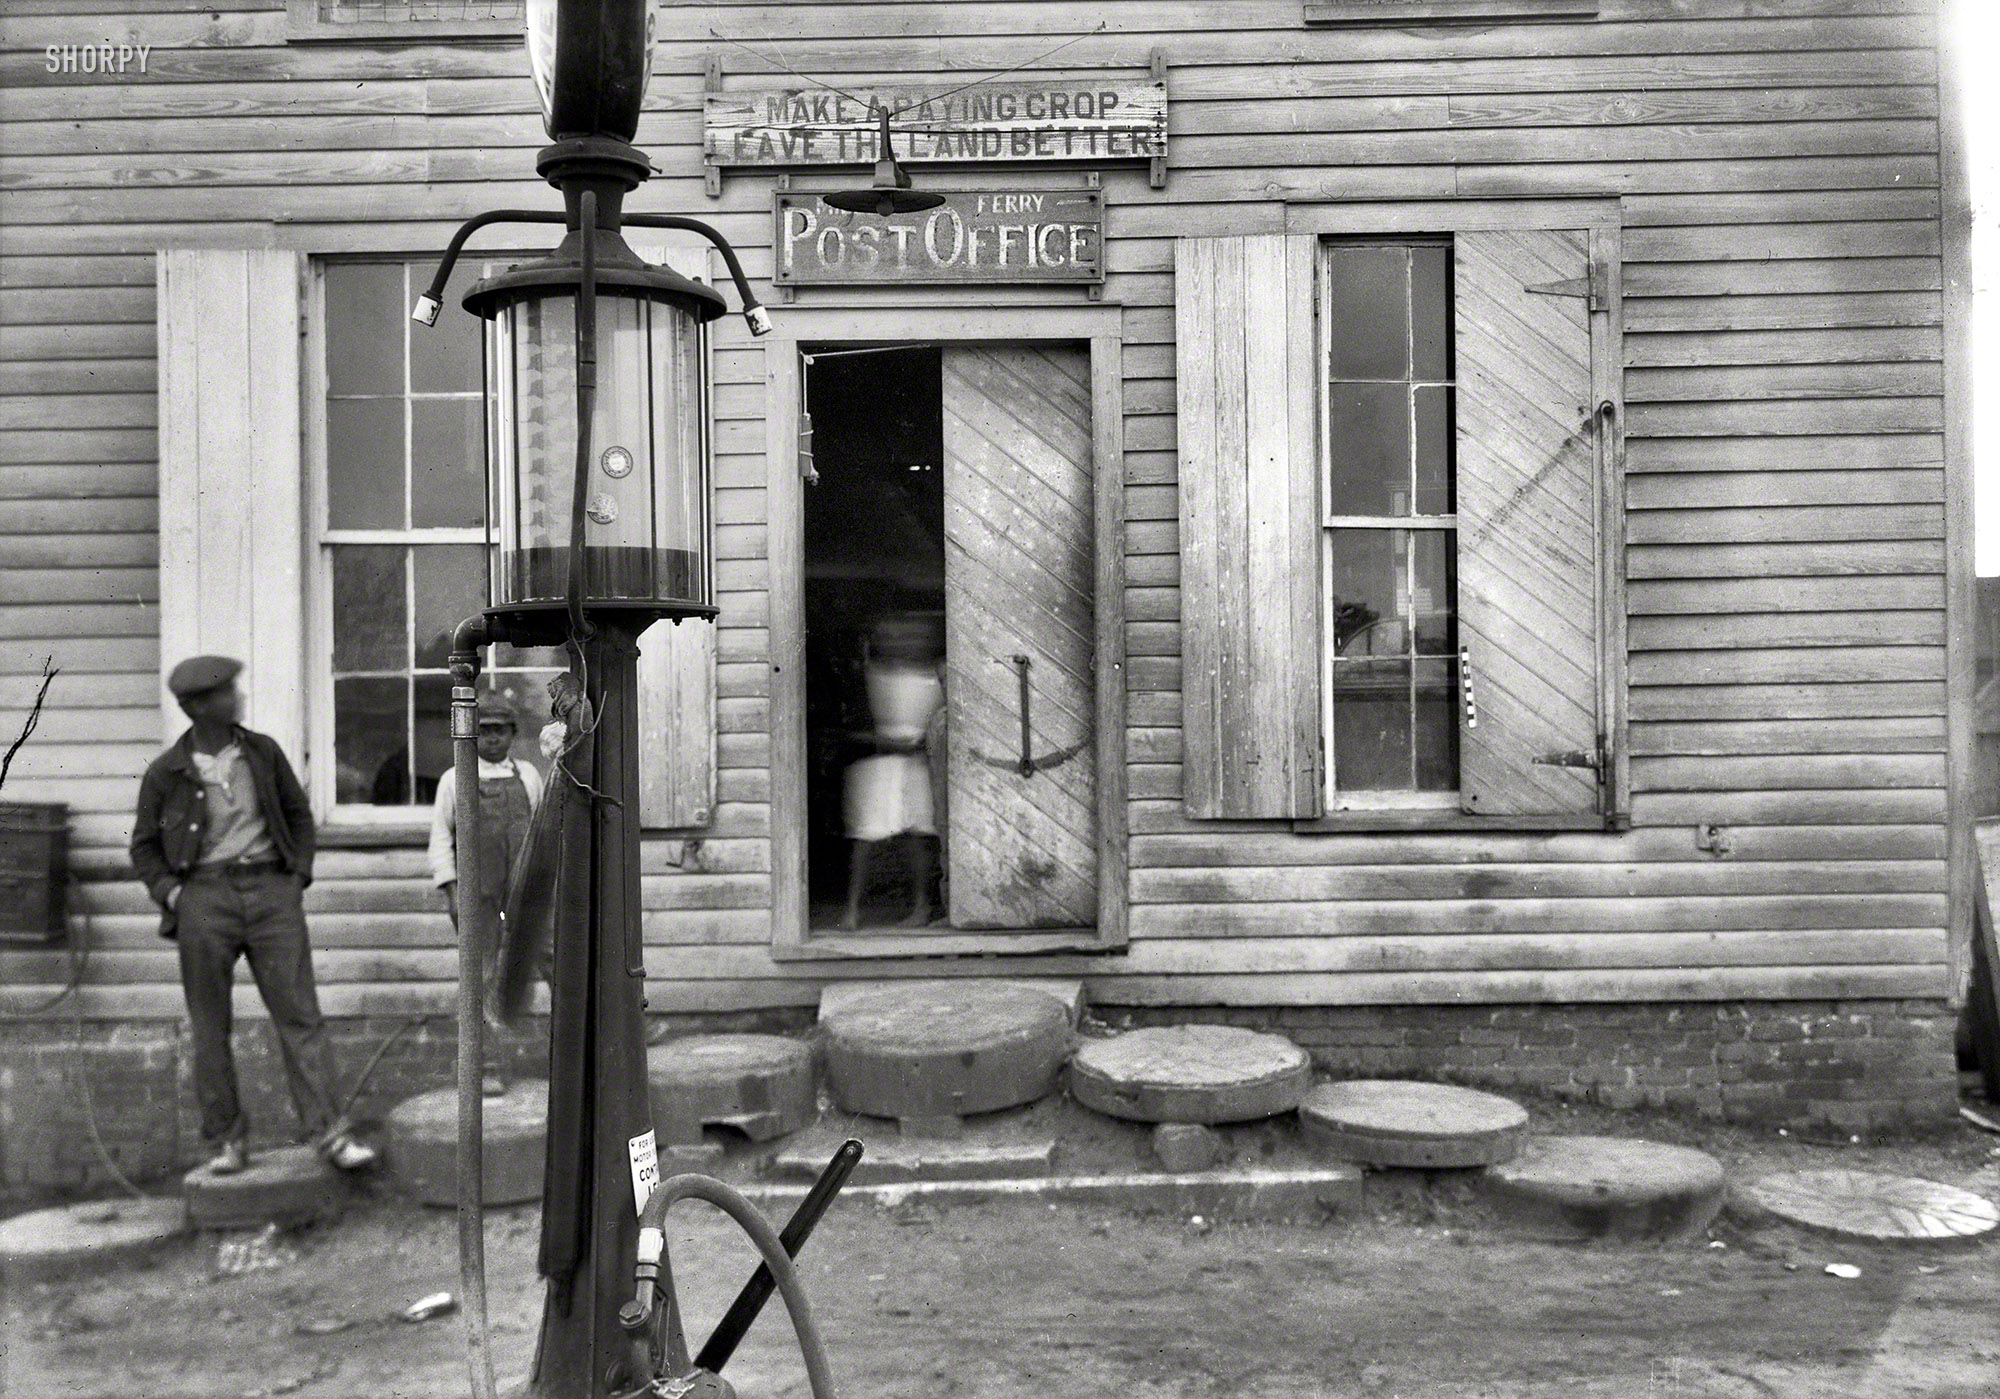 March 25, 1937. "Close-up of front elevation -- old William Henderson store (Miller's Ferry Post Office), State Road 28, Canton Bend near Camden, Wilcox County, Alabama. Built 1858." The perfect place to start your trip. Photo by Alex Bush for the Historic American Buildings Survey. View full size.